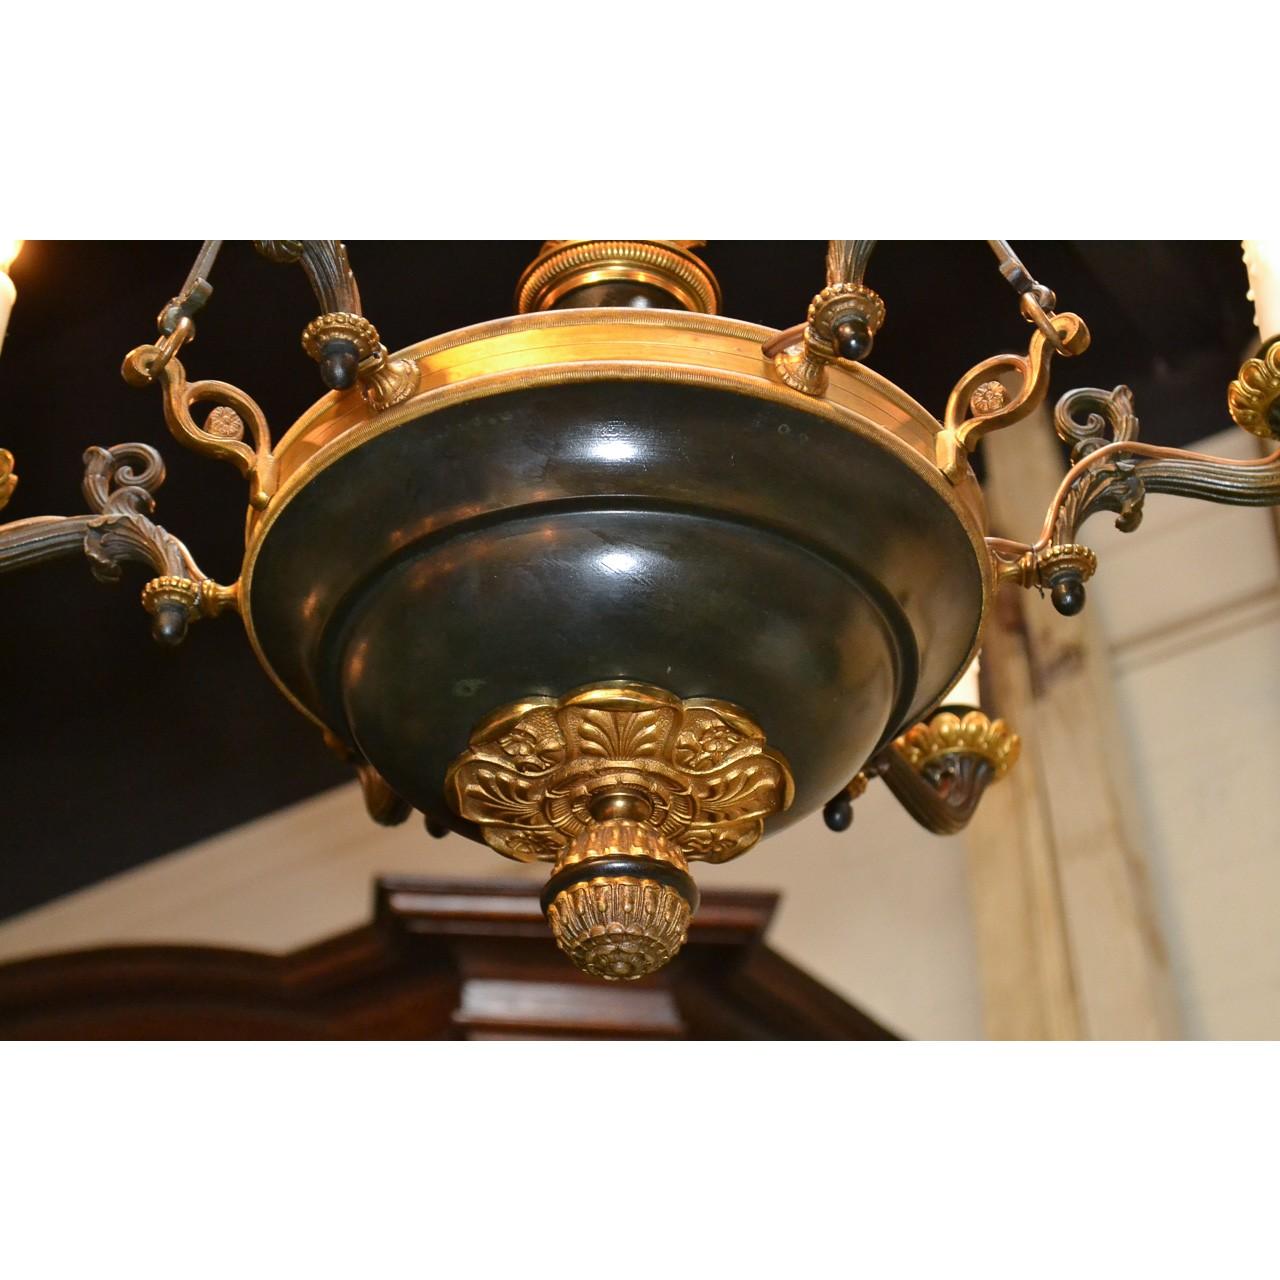 Impressive 19th century French Empire style bronze and tole chandelier. The bowl-shaped base surmounted by six scrolling horn-shaped arms with flower-petal candle cups, and centered by a beautiful flower and flame finial. The bottom with an